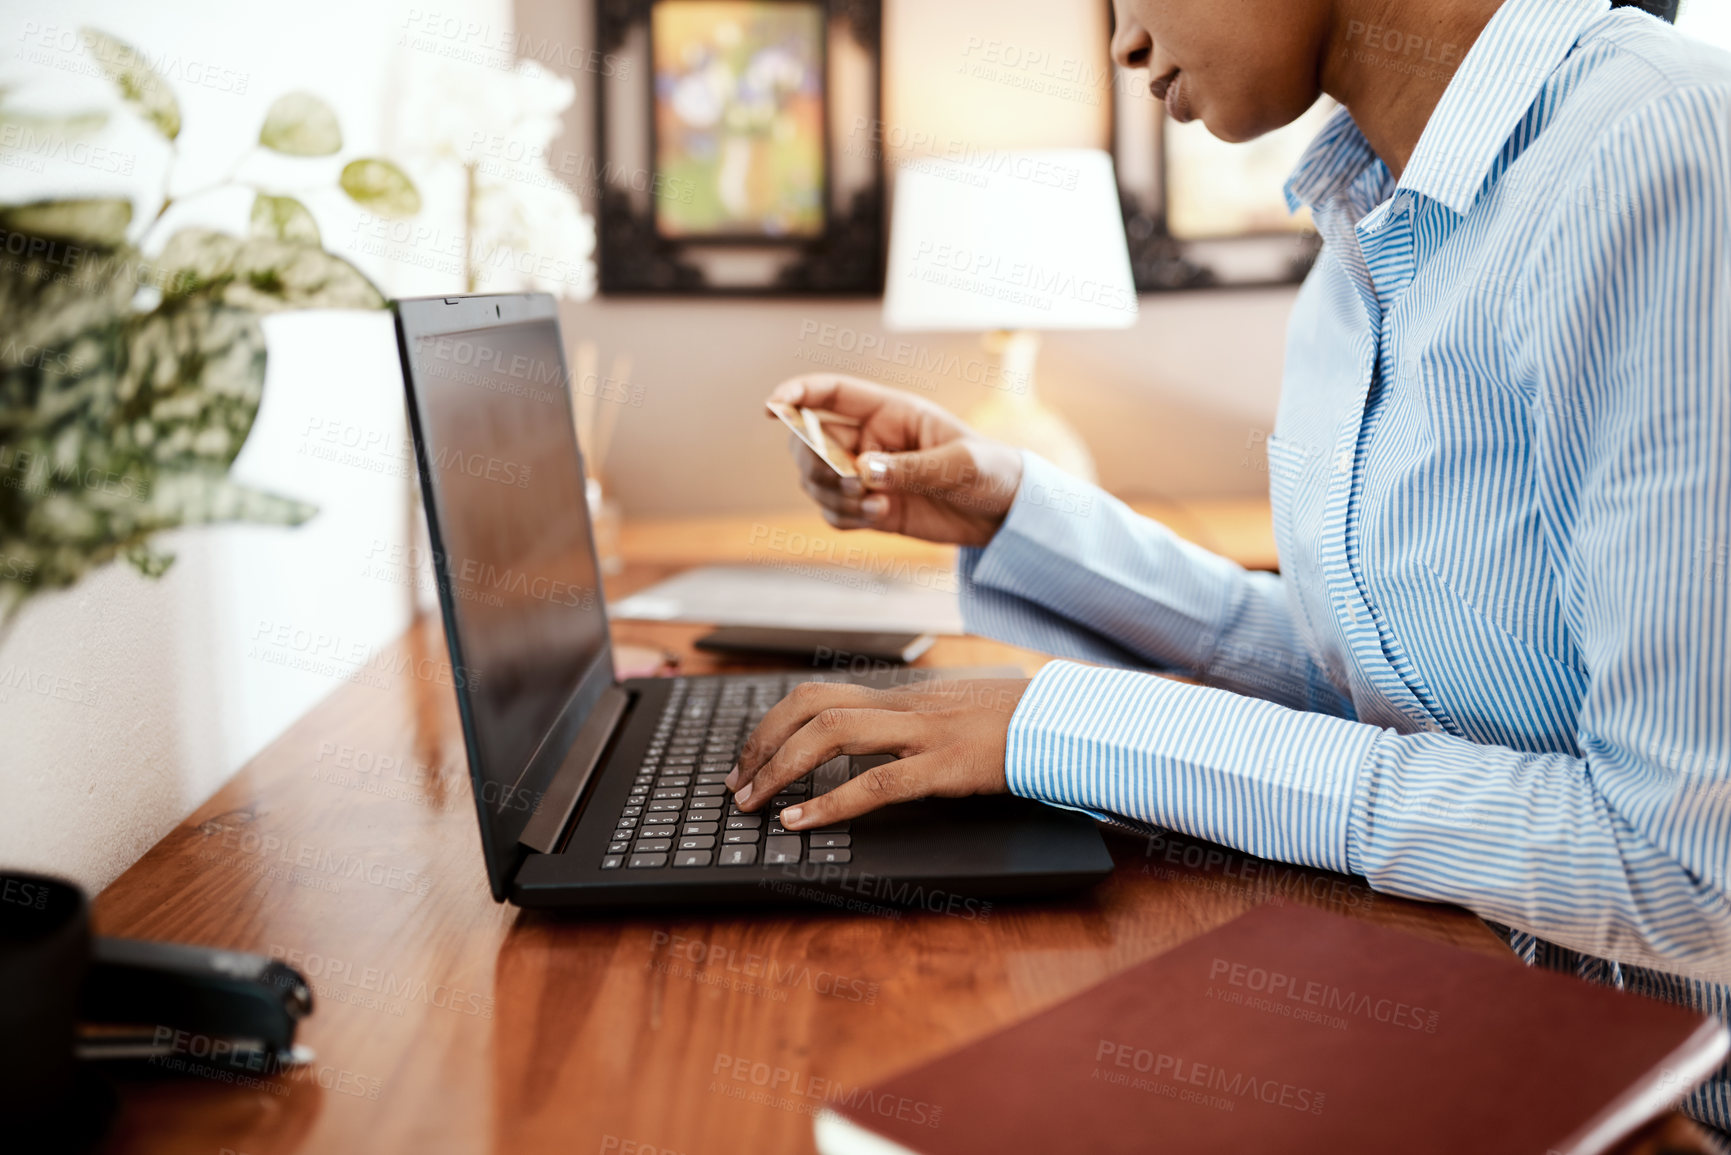 Buy stock photo Cropped shot of a businesswoman using a laptop and credit card